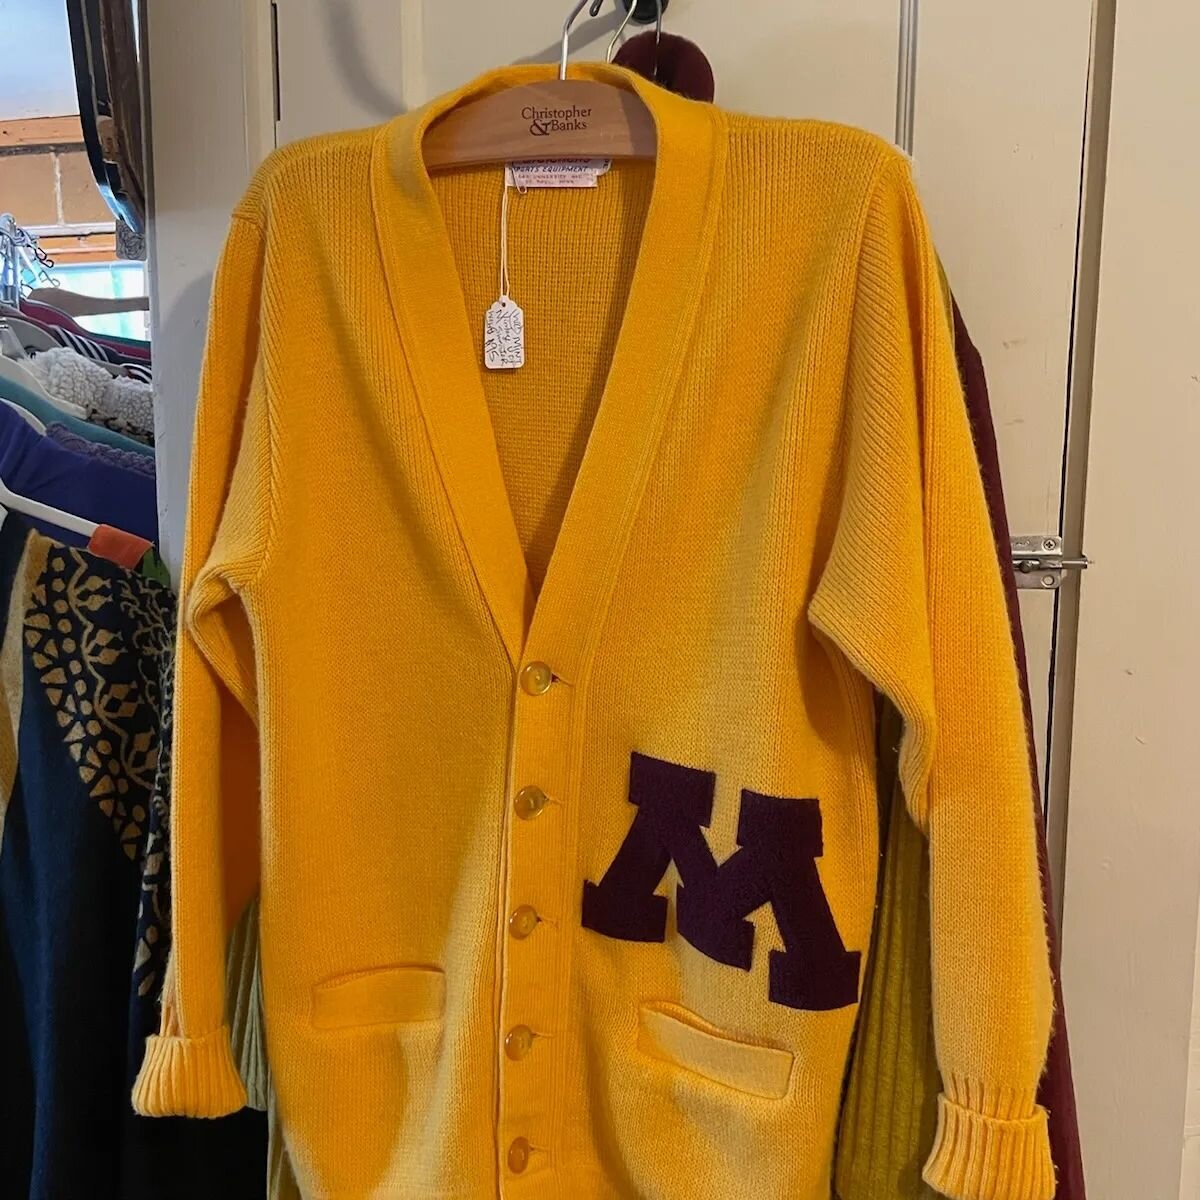 Vintage U of M Sweater - Mint Condition - $95 #availableatthebarn